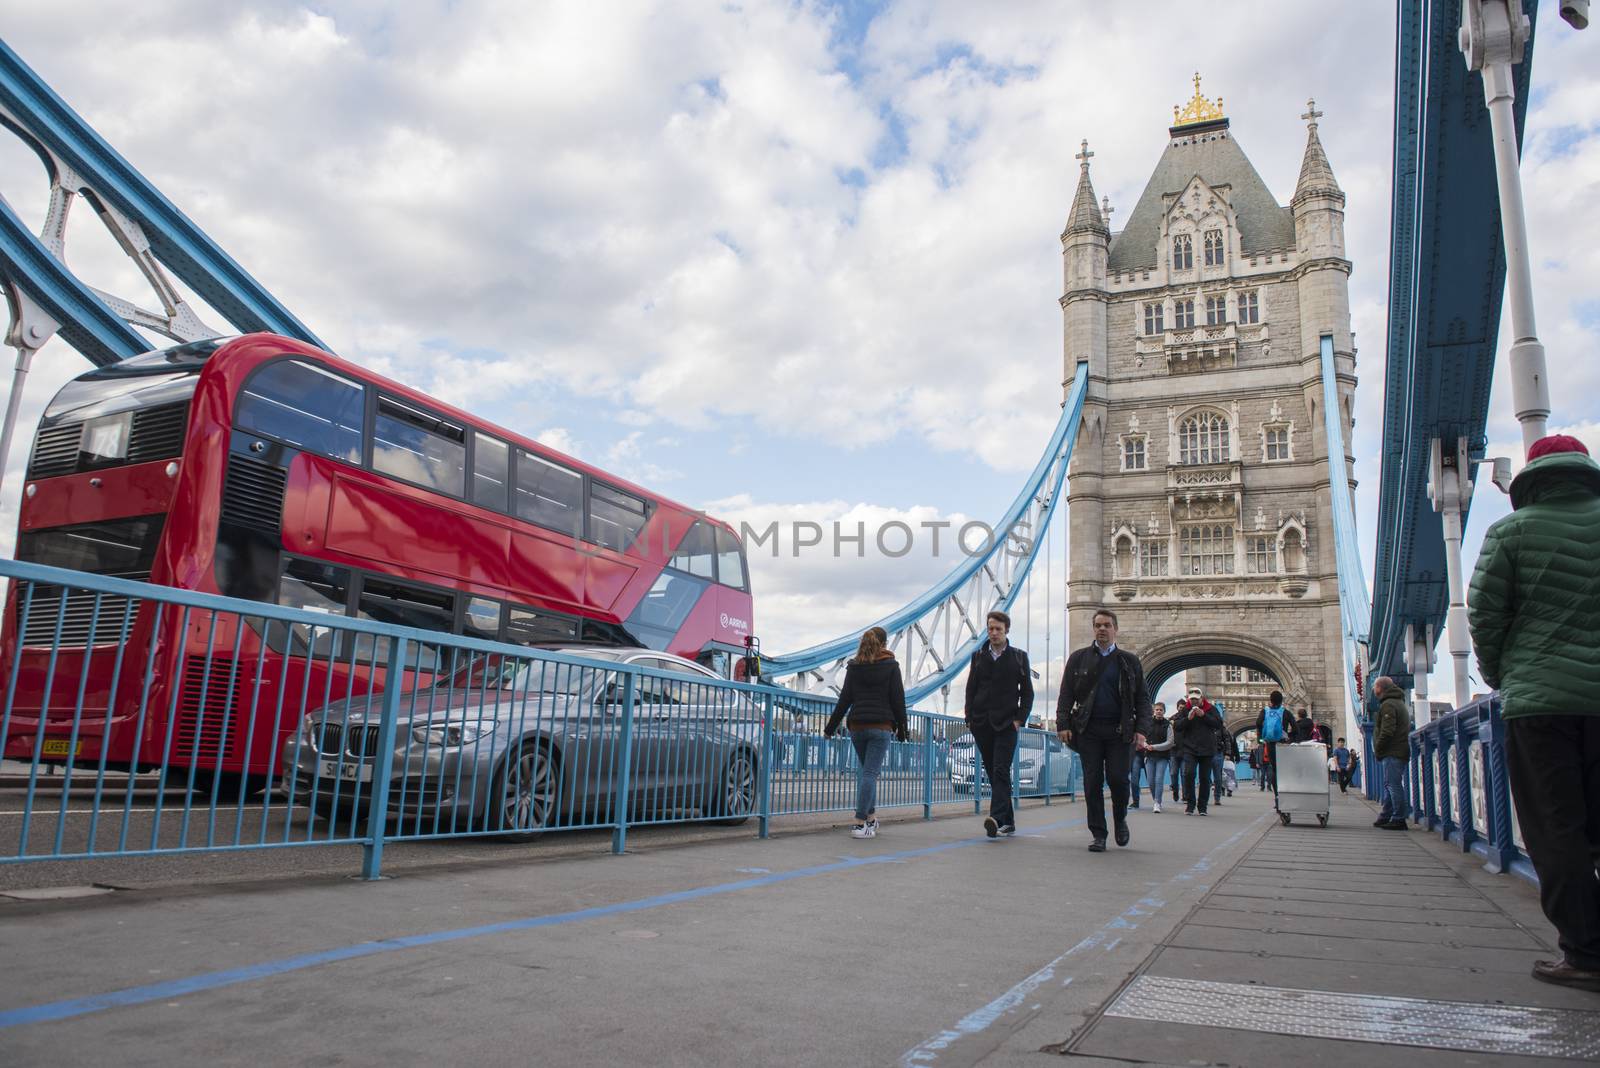 LONDON, UK – APRIL 05 2016: Commuters crossing Tower Bridge during rush hour. Tower Bridge links the South of River Thames to the City area.